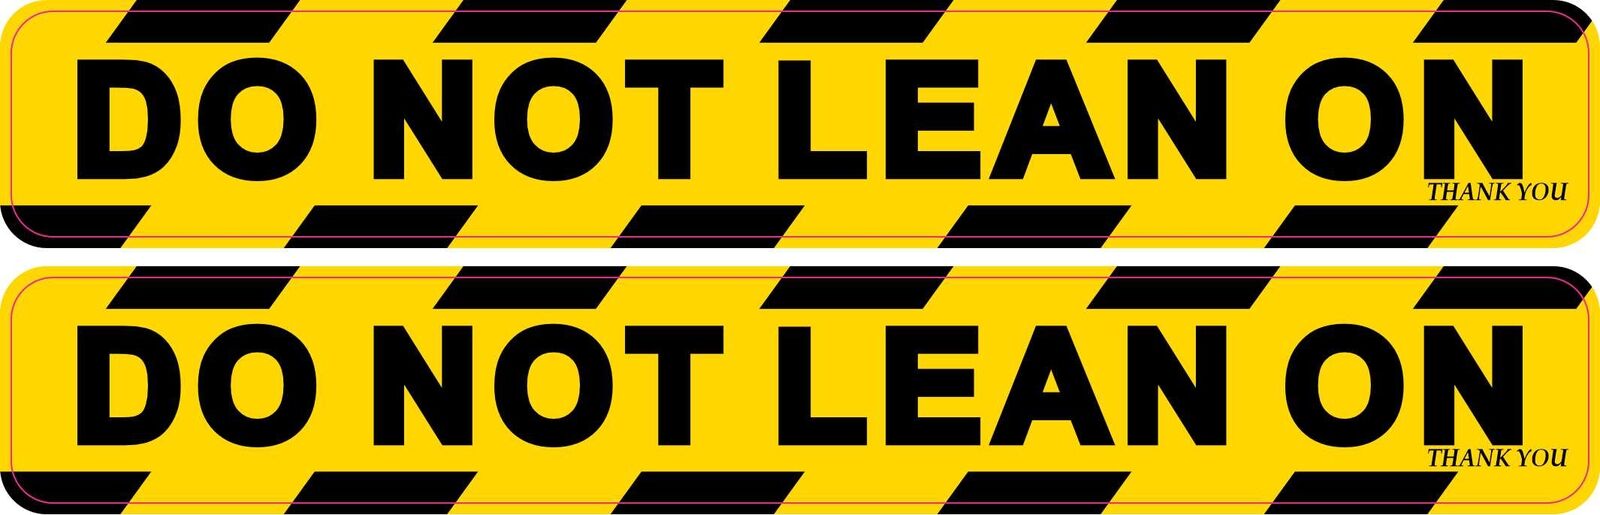 StickerTalk Do Not Lean On Stickers, 7 inches x 1 inches